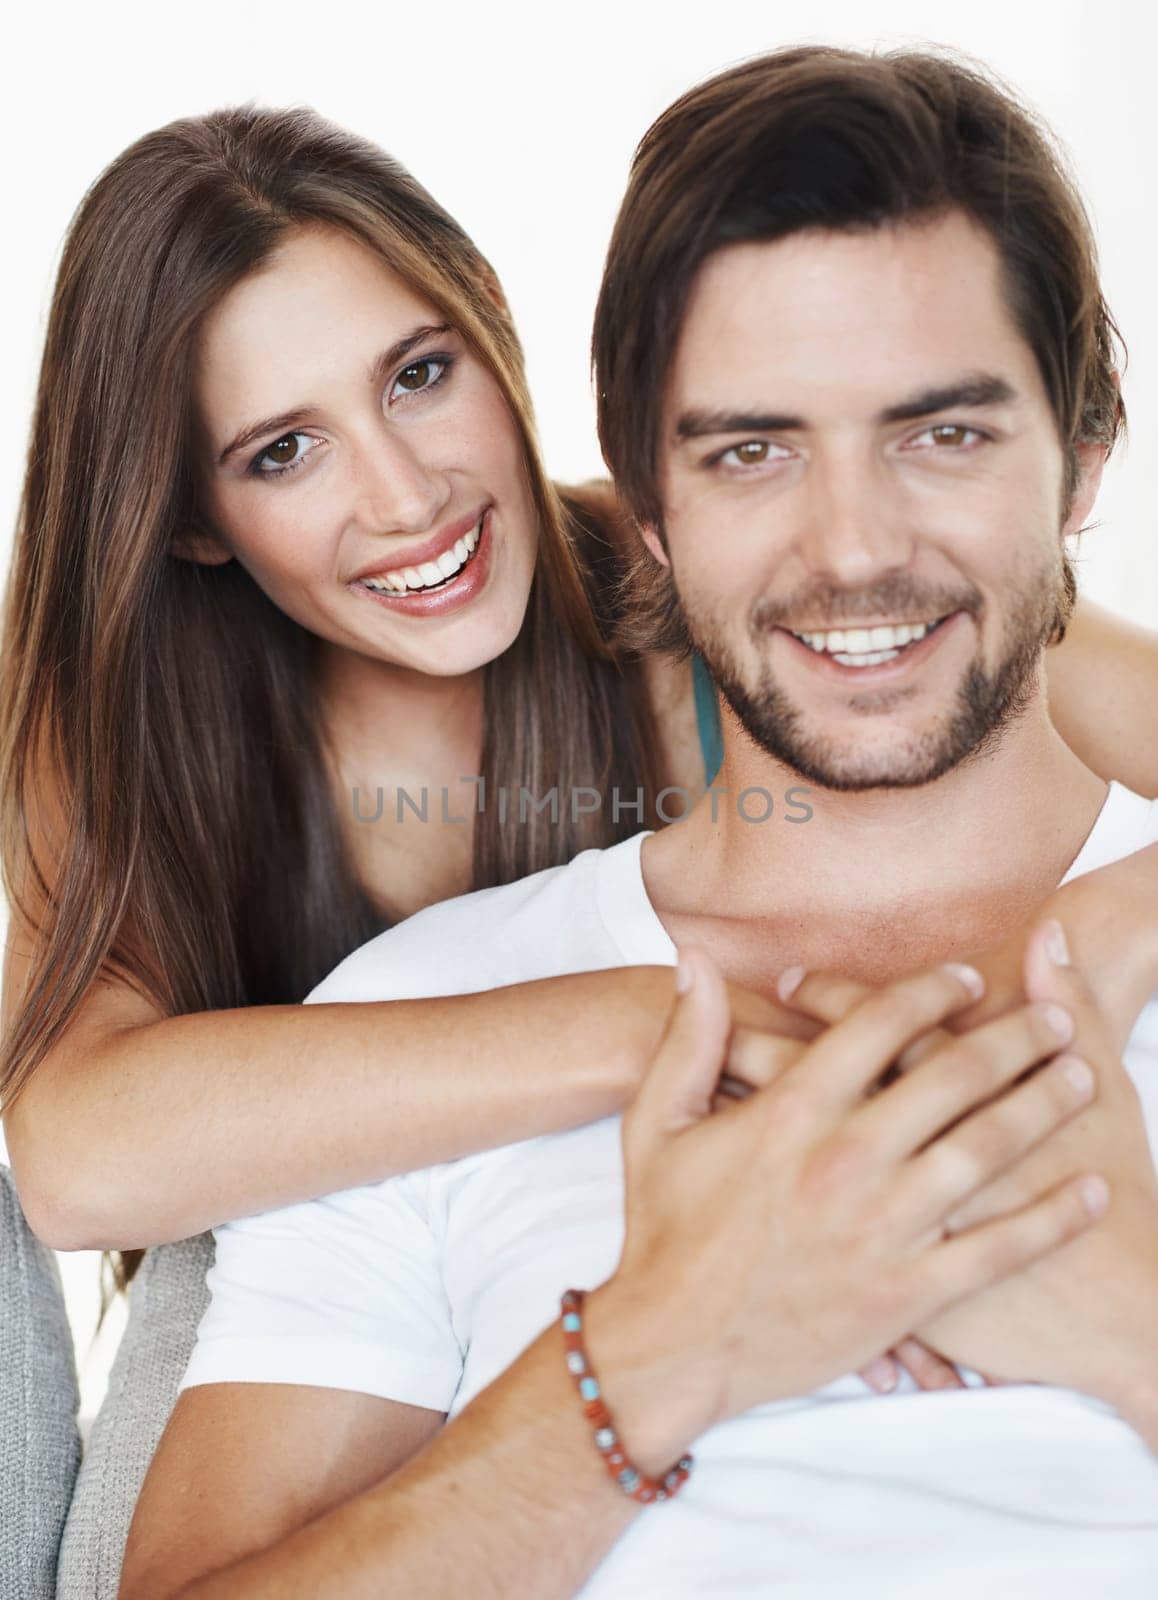 Smile, hug and portrait of couple in studio together with romance, commitment and marriage support. Love, man and happy woman embrace with relationship trust, care and partnership on white background.